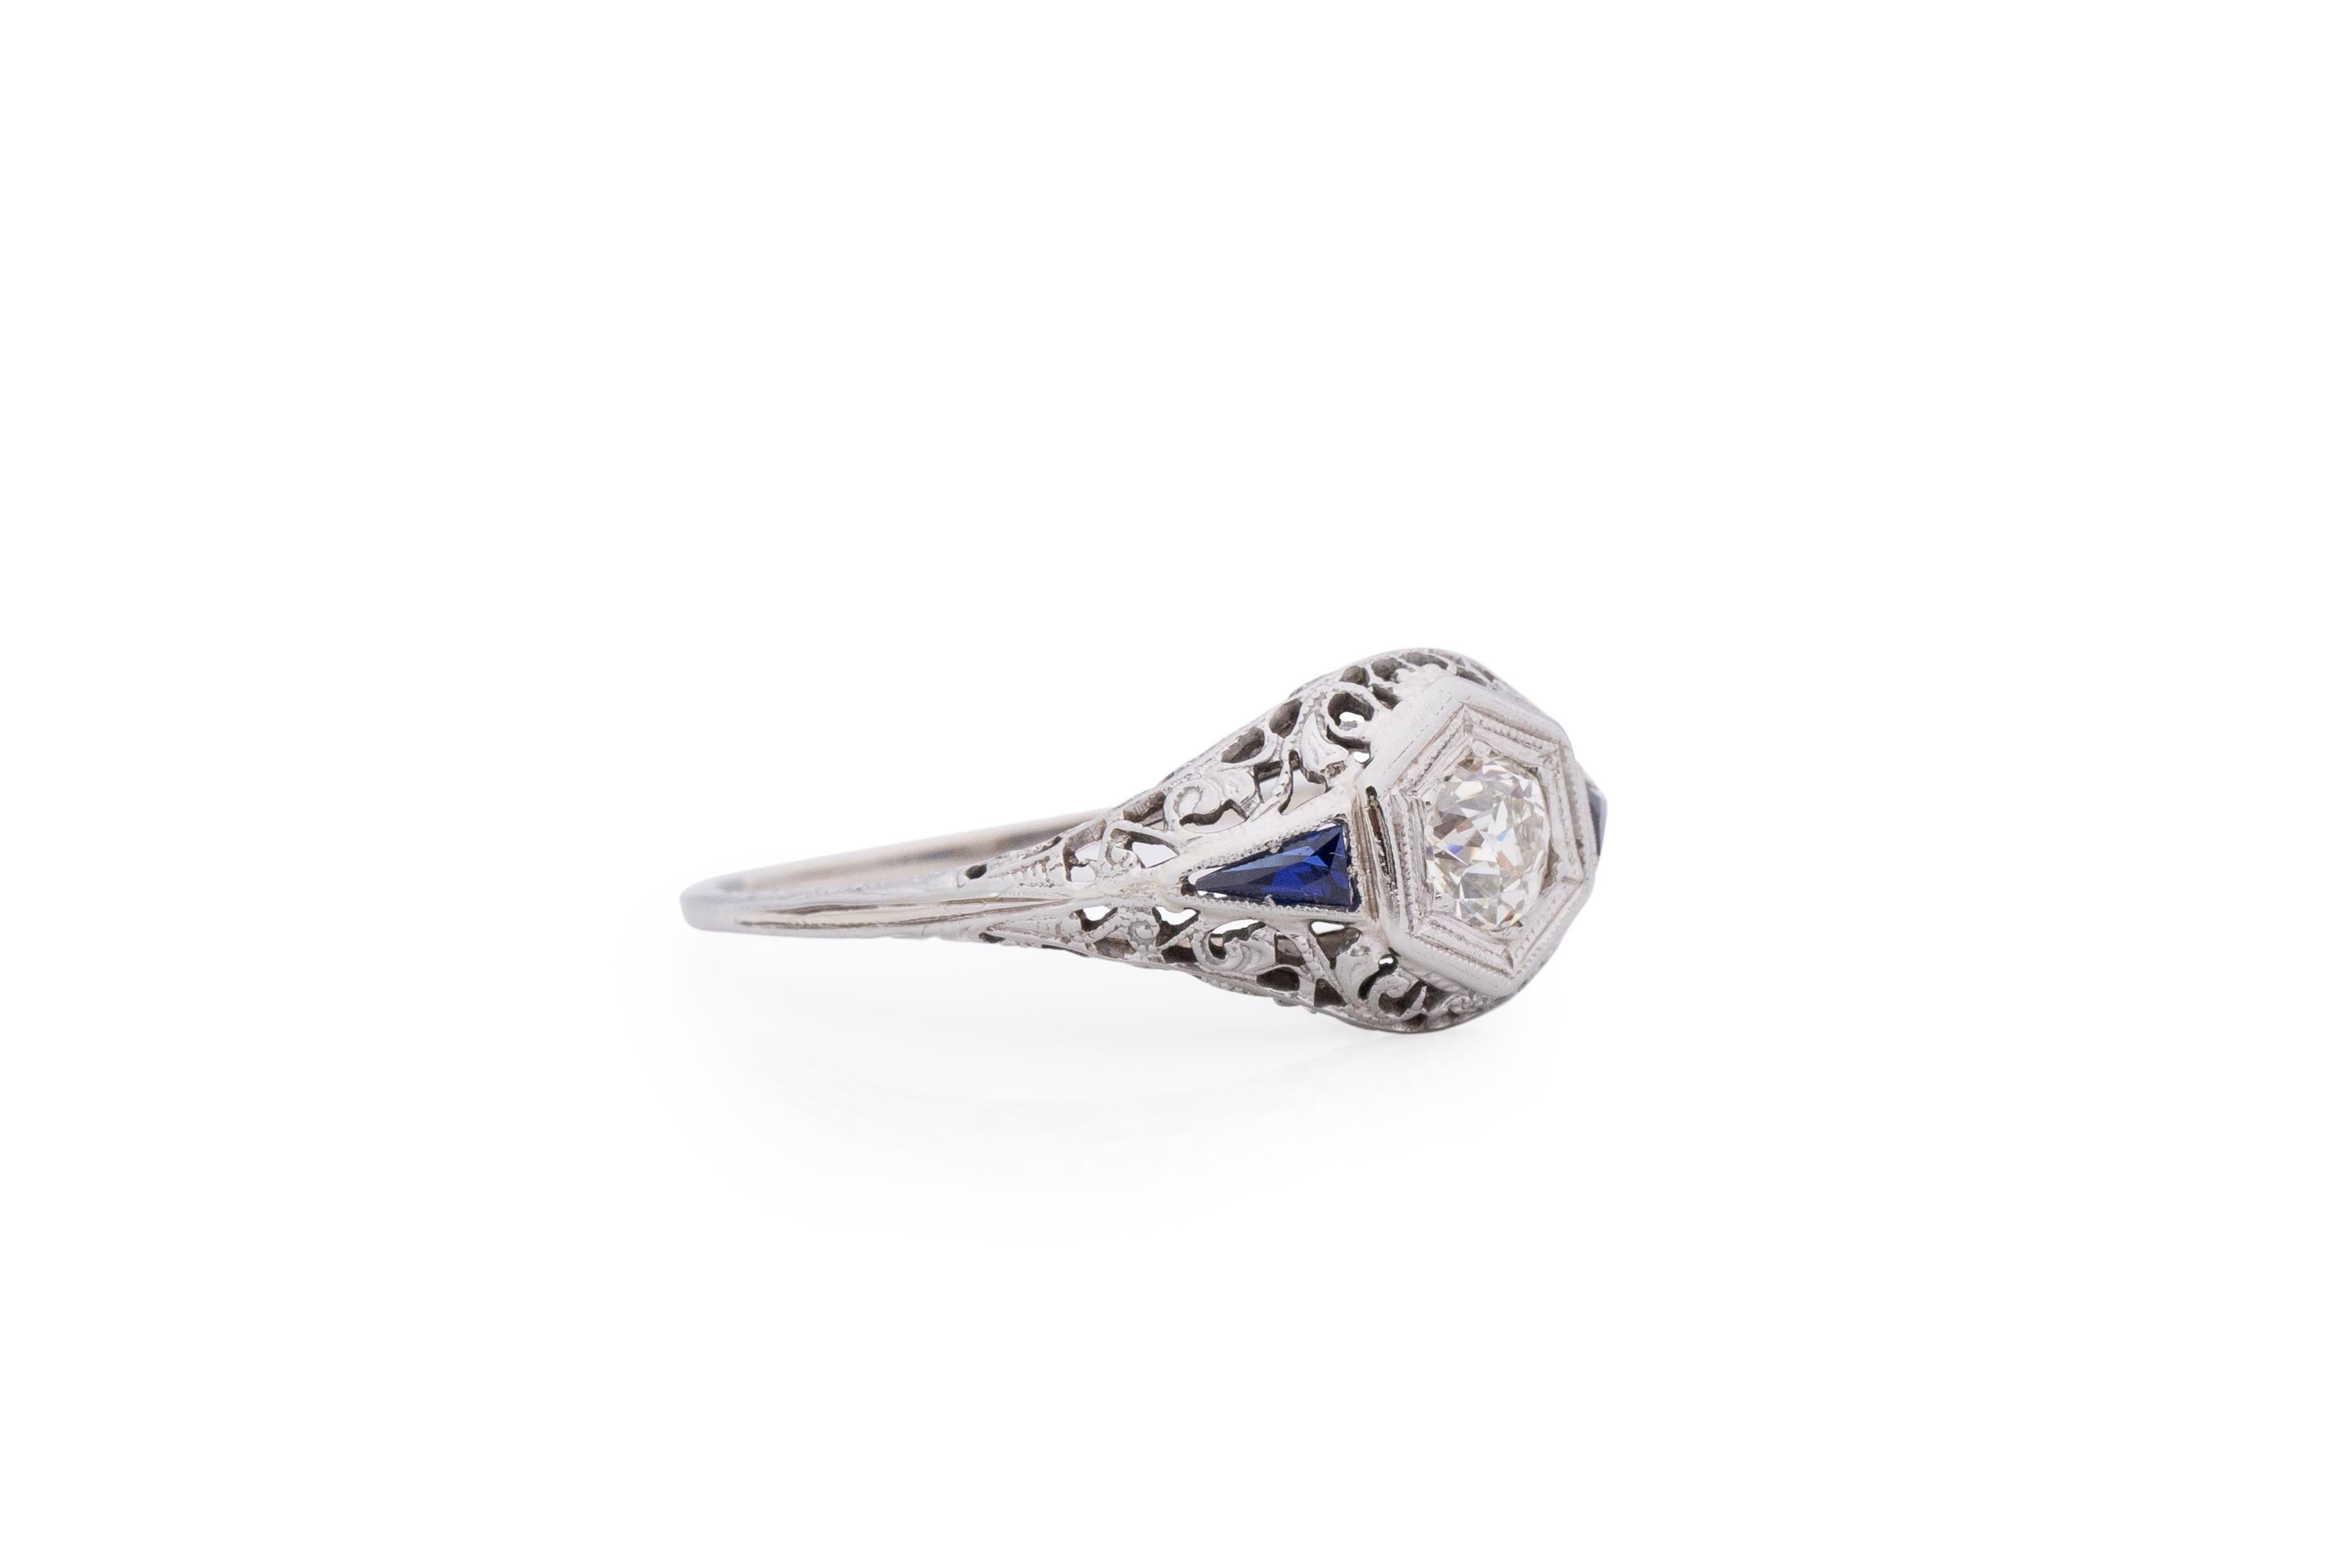 Item Details: 
Ring Size: 8.75
Metal Type: 18 Karat White Gold [Hallmarked, and Tested]
Weight: 2.0 grams

Center Diamond Details:
Weight: .25 carat
Cut: Old European brilliant
Color: J
Clarity: VS

Side Stone Details:
Type: Sapphire,